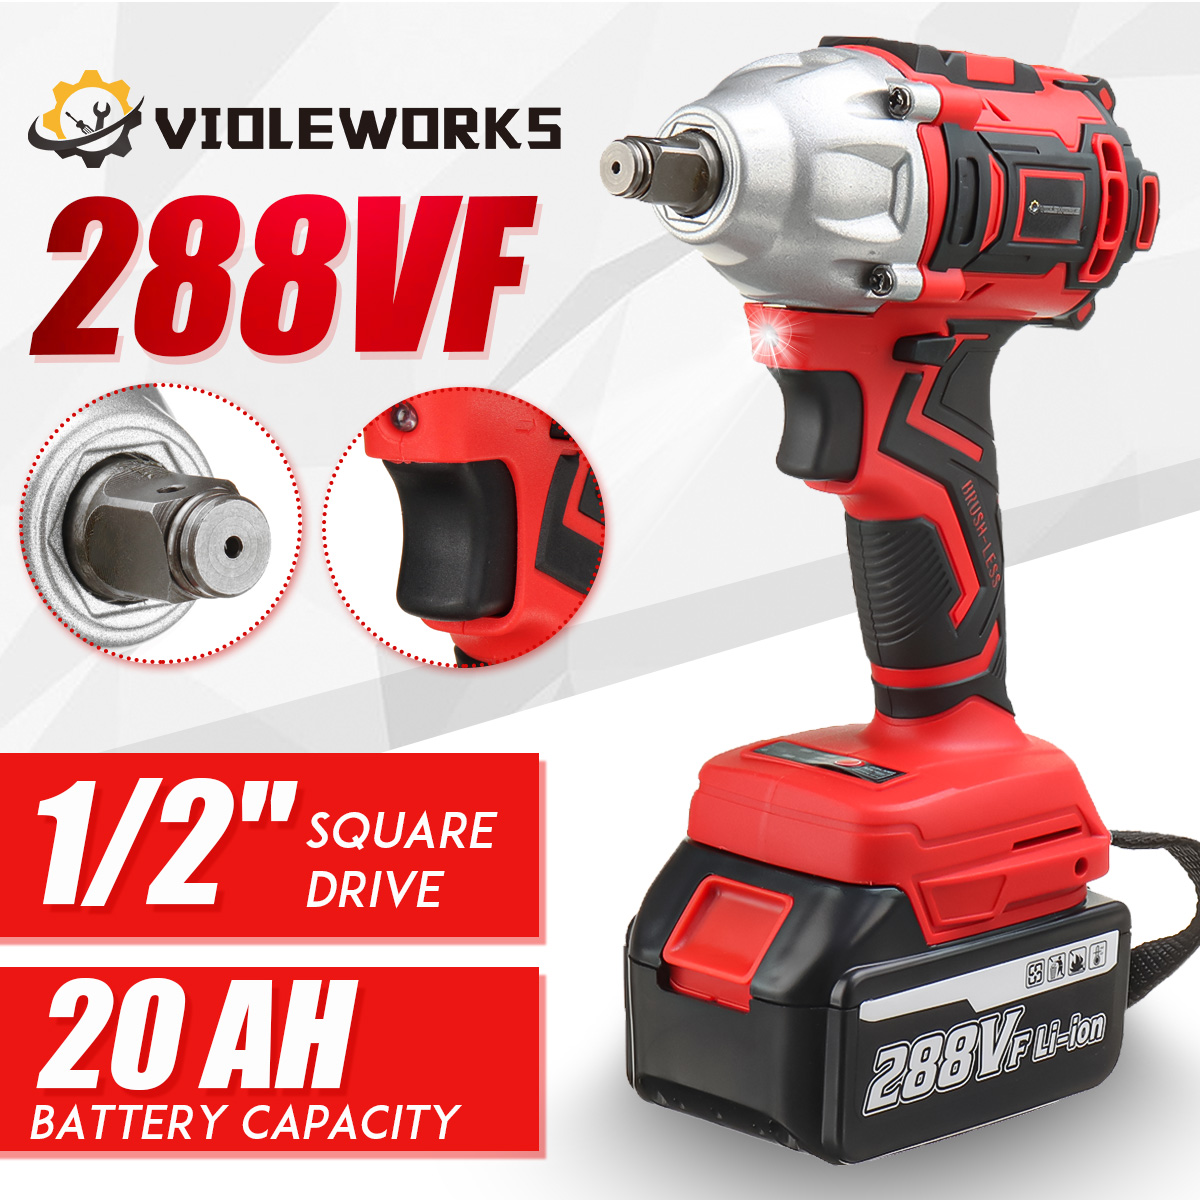 VIOLEWORKS-288VF-12quot-320NM-Electric-Wrench-Cordless-Brushless-Impact-Wrench-With-210-Battery-Also-1833240-1